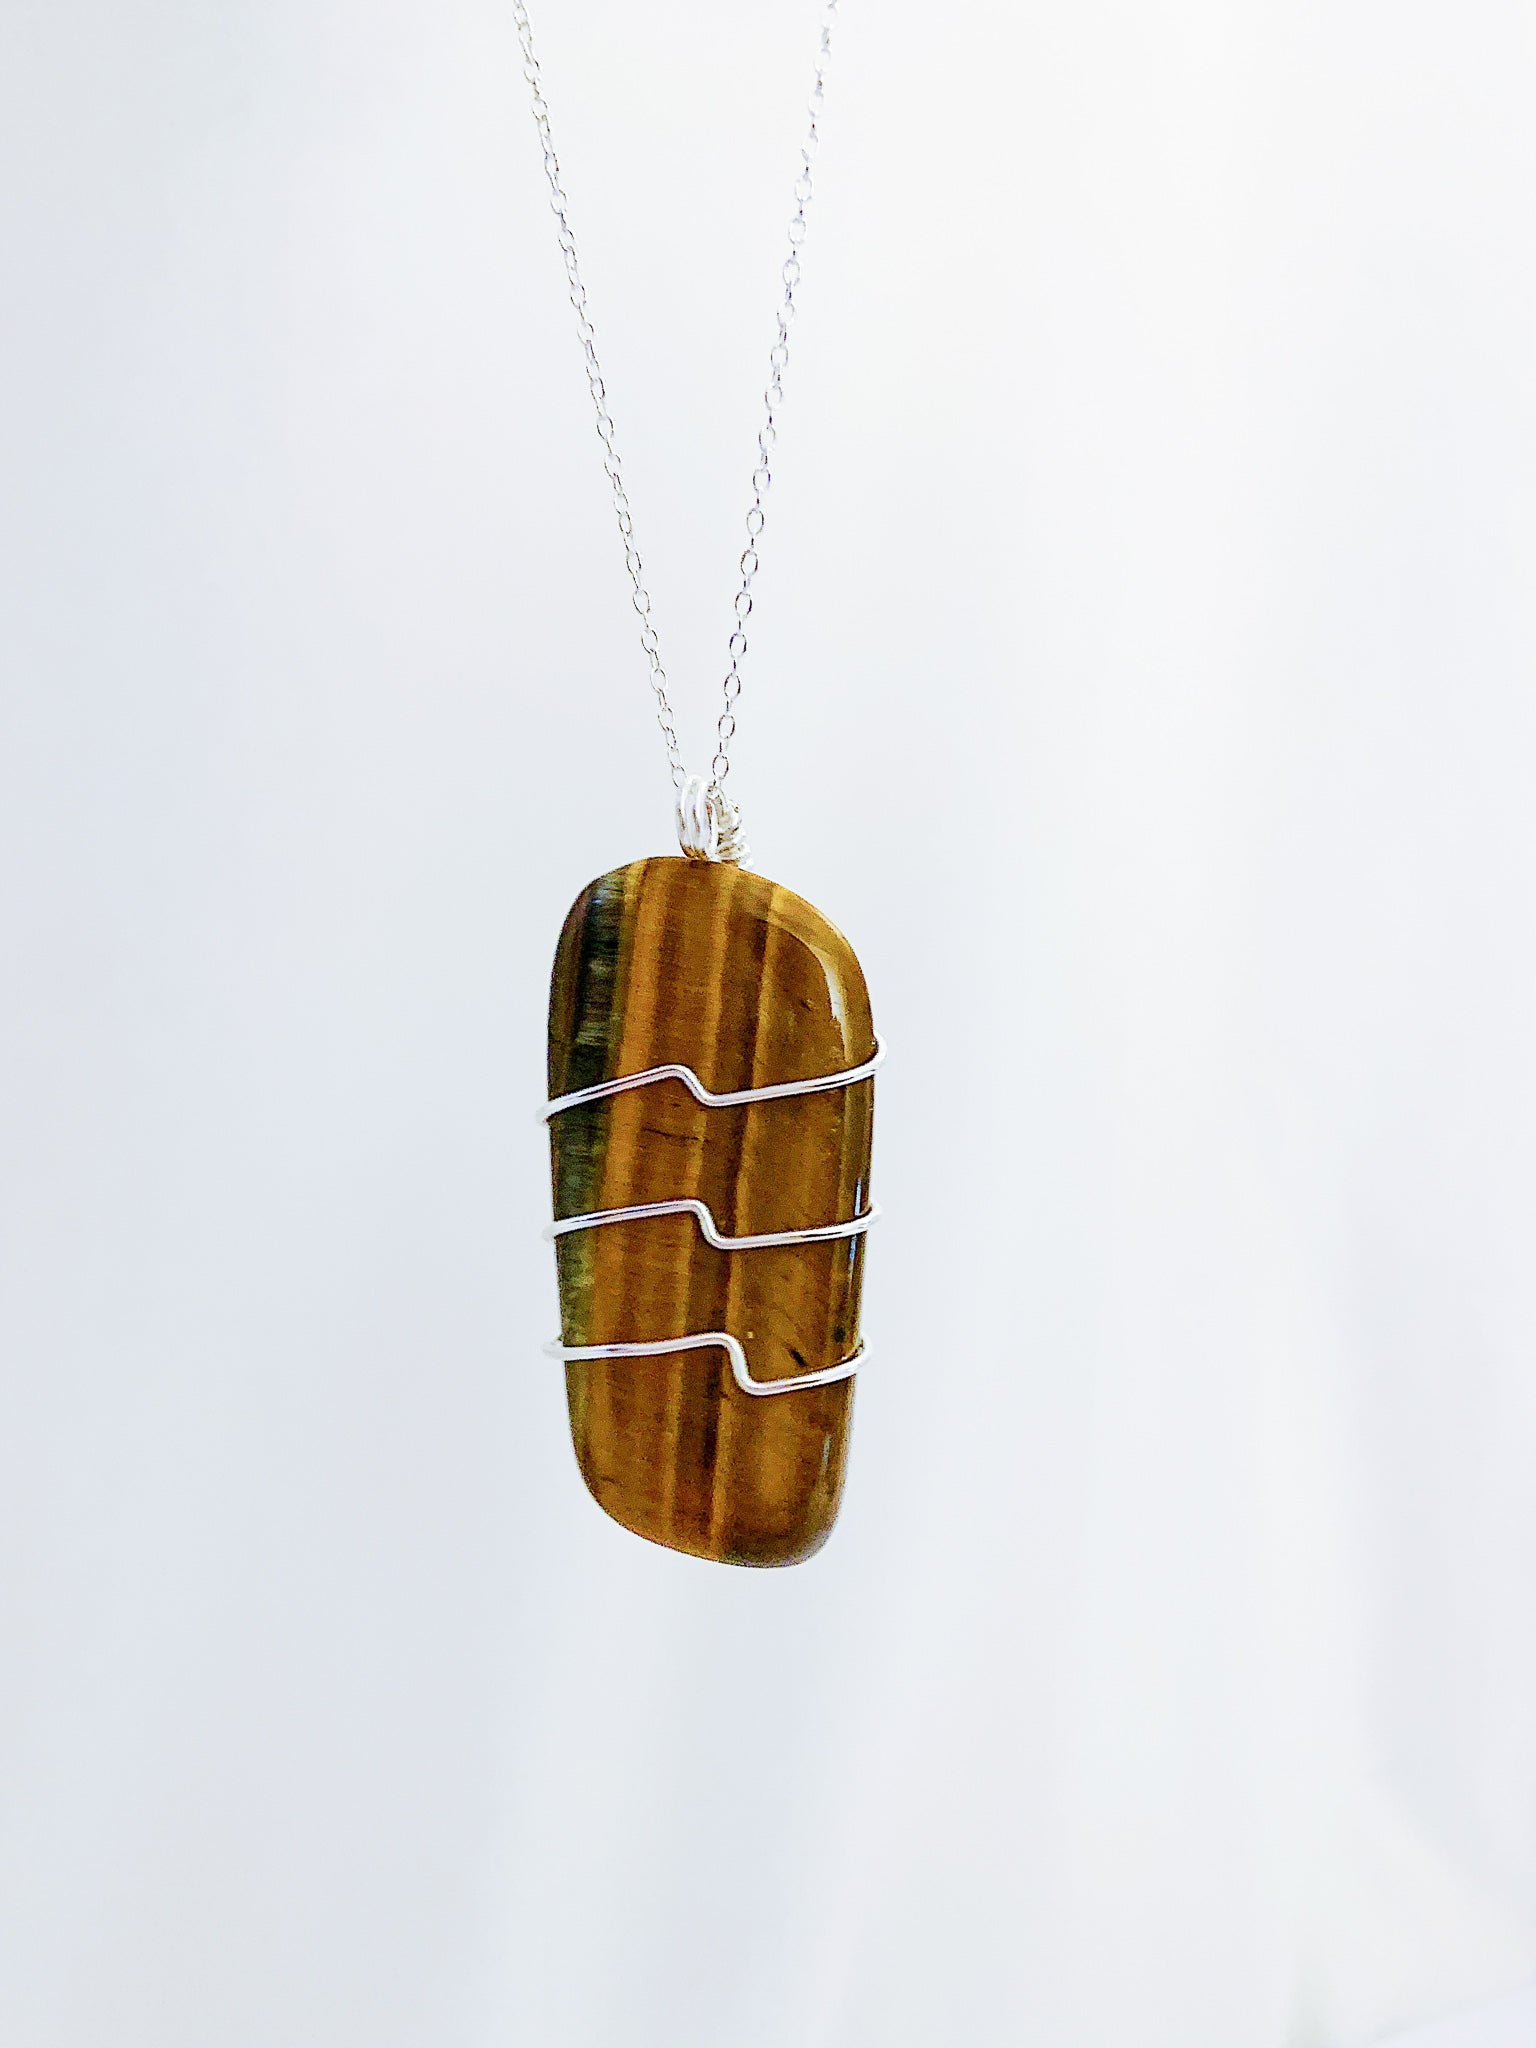 Tiger's Eye Wrapped Necklace - 40cm Length - Celestial Stones